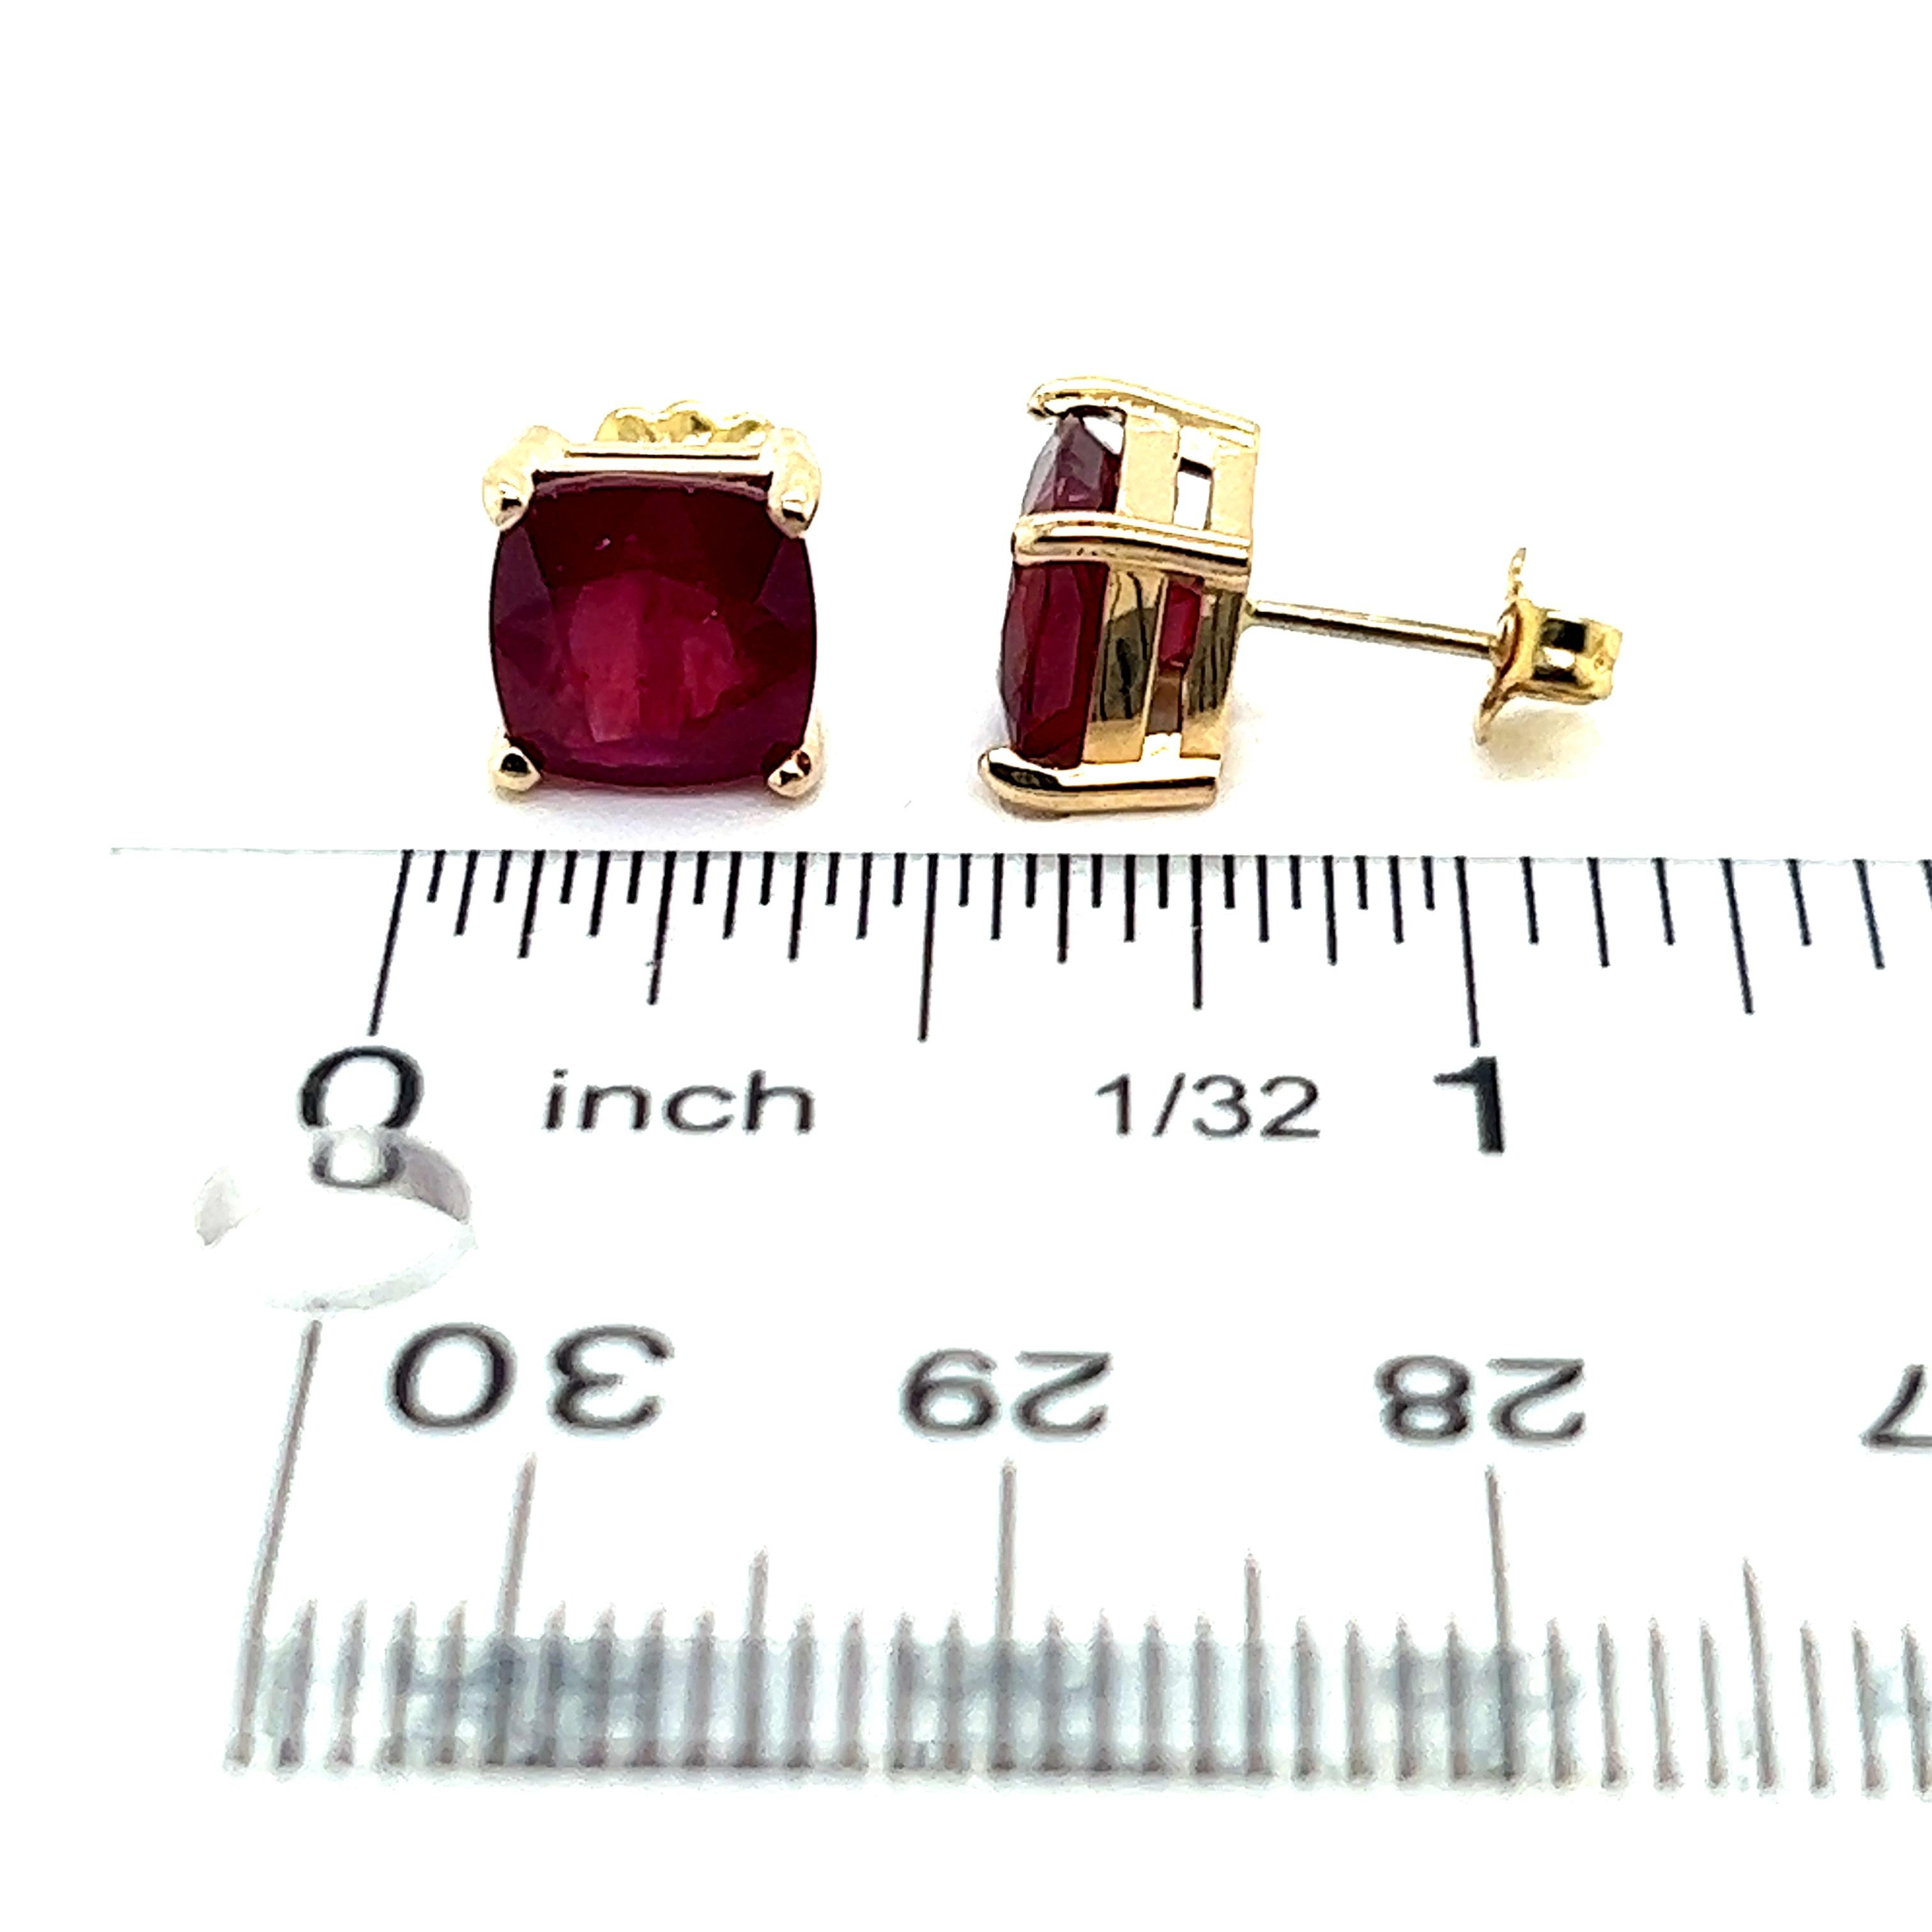 Natural Finely Faceted Quality Composite Ruby Stud Earrings 14k Yellow Gold 4.18 TW Certified $799 307909

This is a Unique Custom Made Glamorous Piece of Jewelry!

Nothing says, “I Love you” more than Diamonds and Pearls!

These Ruby earrings have